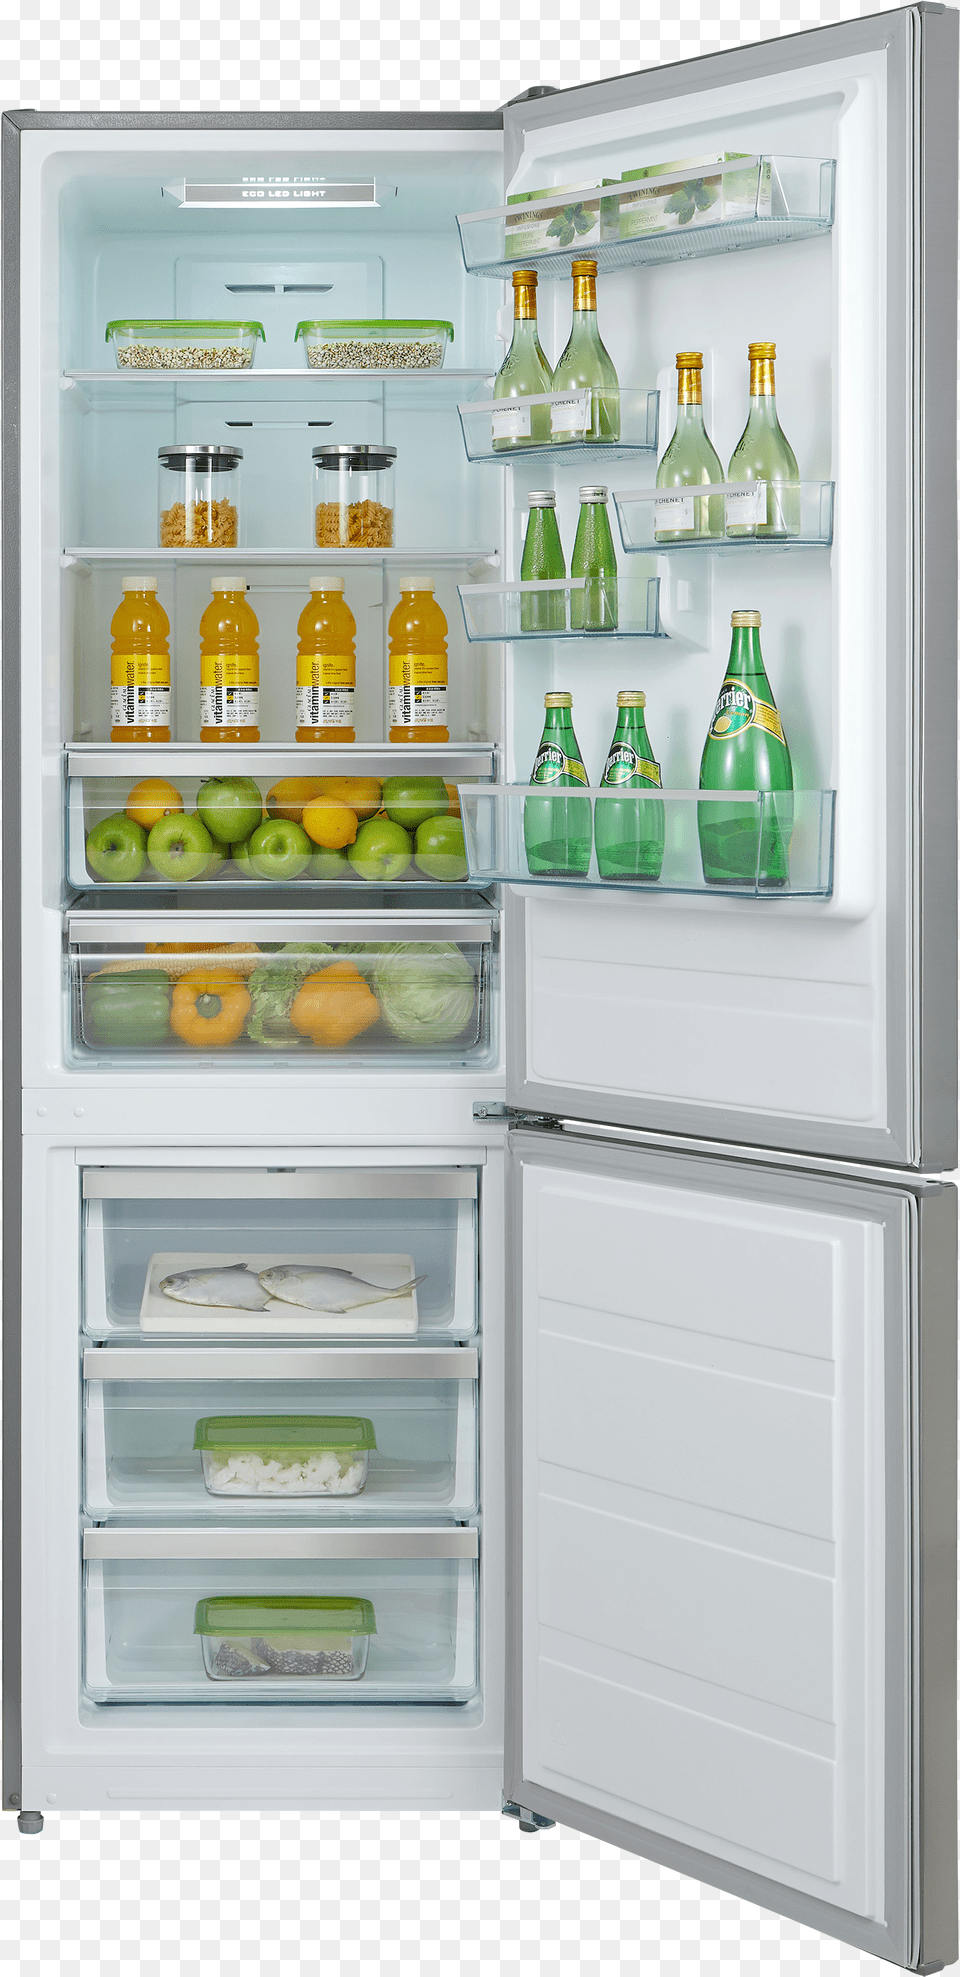 Image 2 Kb Morris Inox, Appliance, Device, Electrical Device, Refrigerator Png